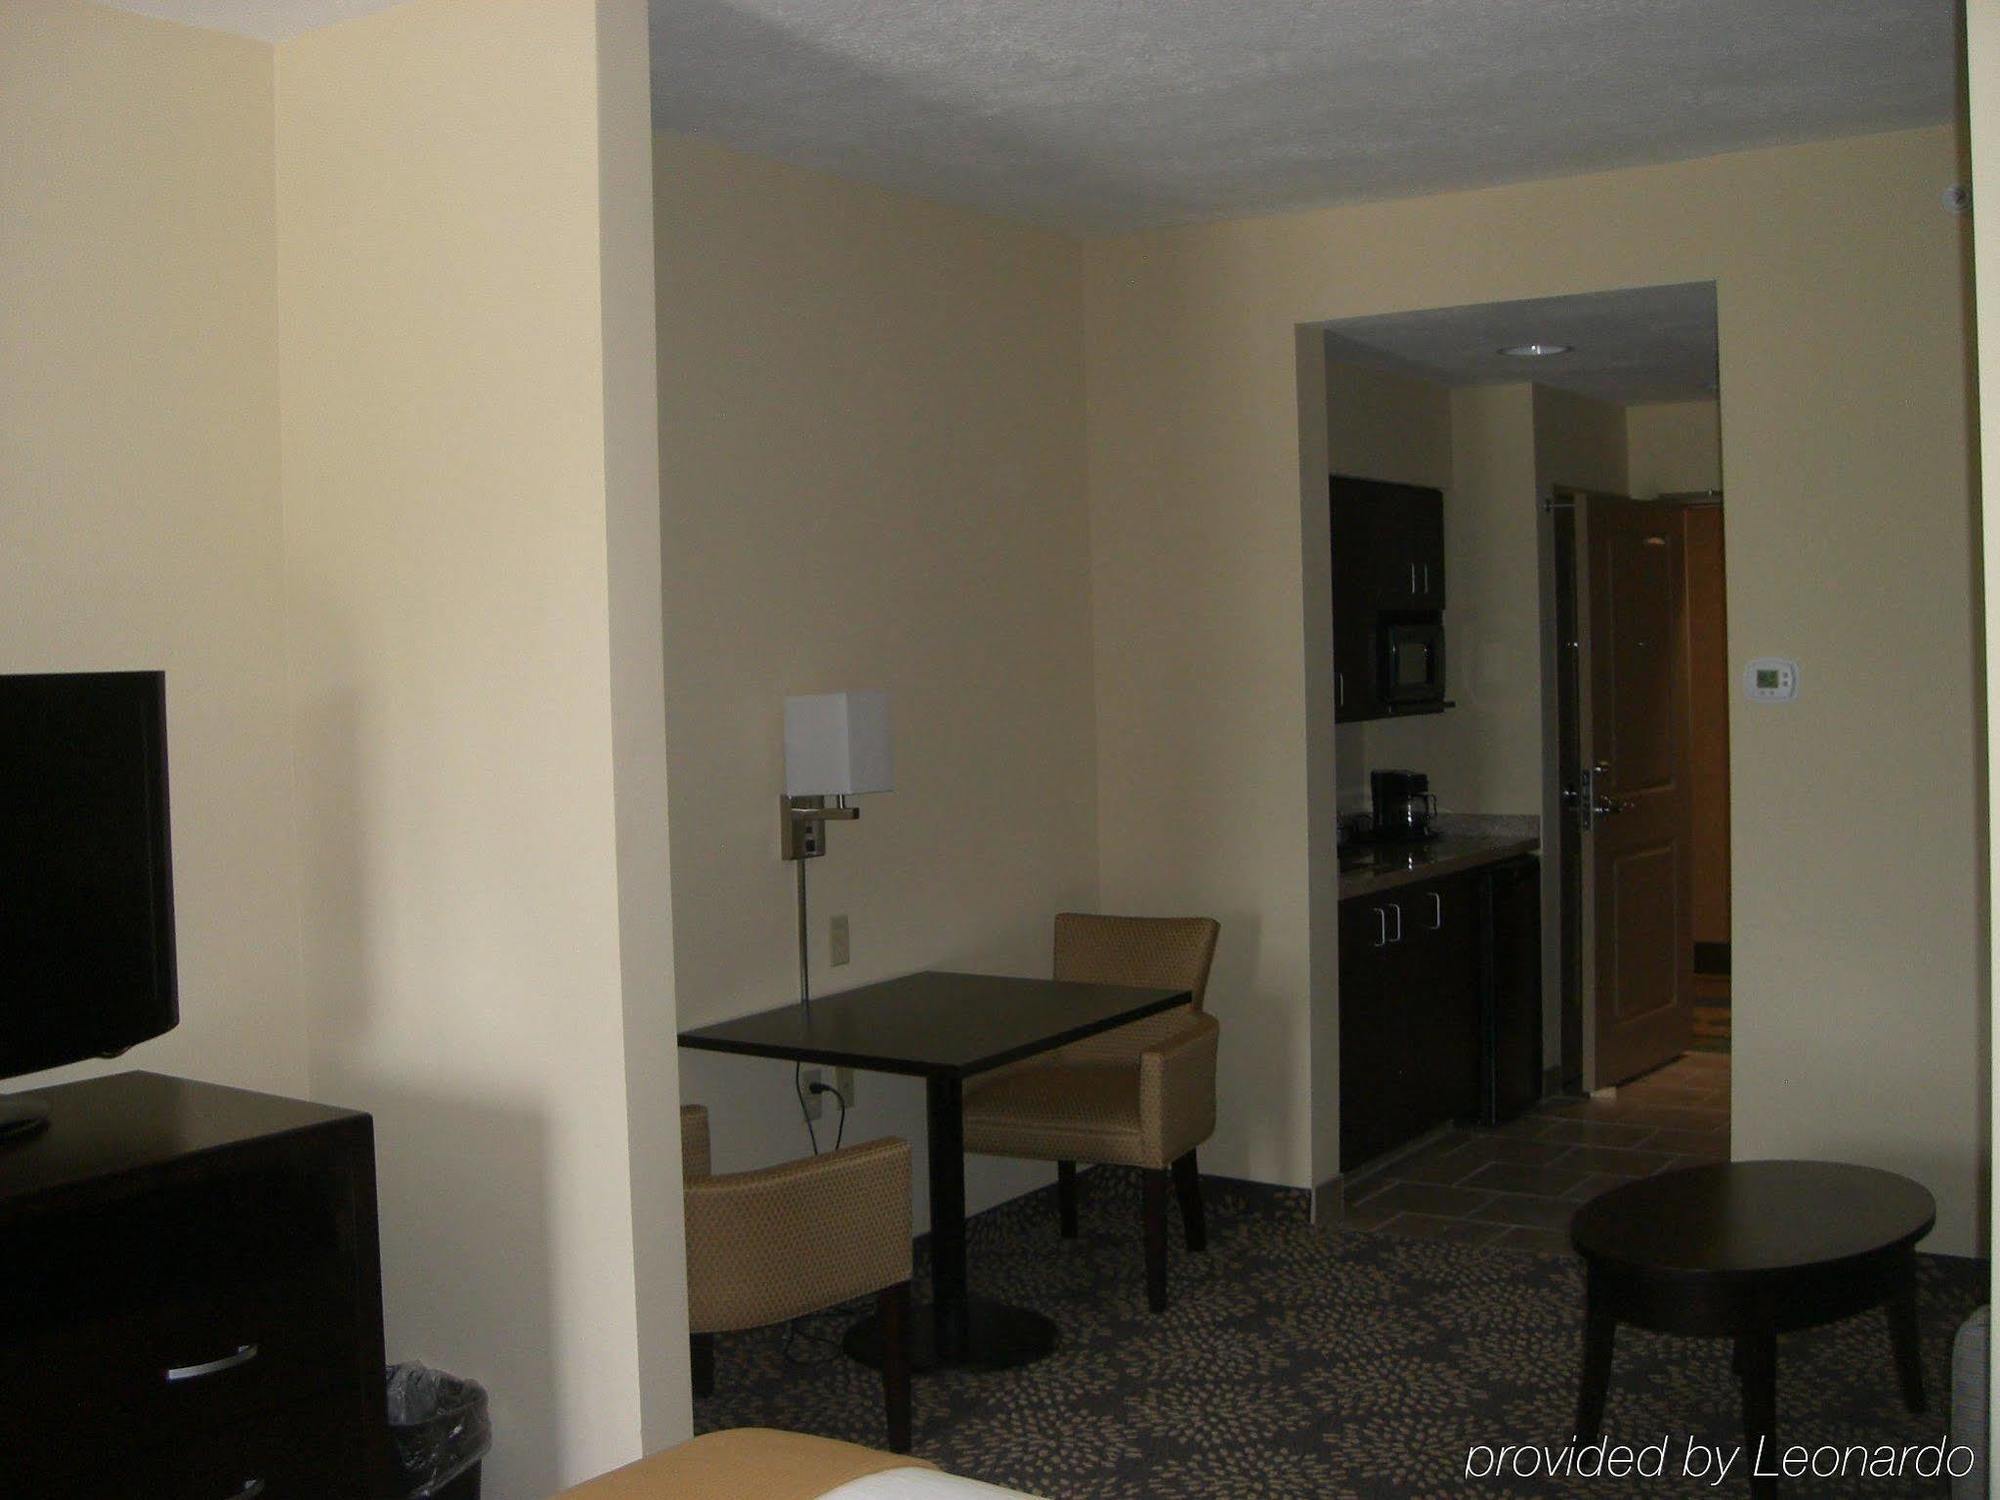 Holiday Inn Express Hotel & Suites Grand Island Room photo